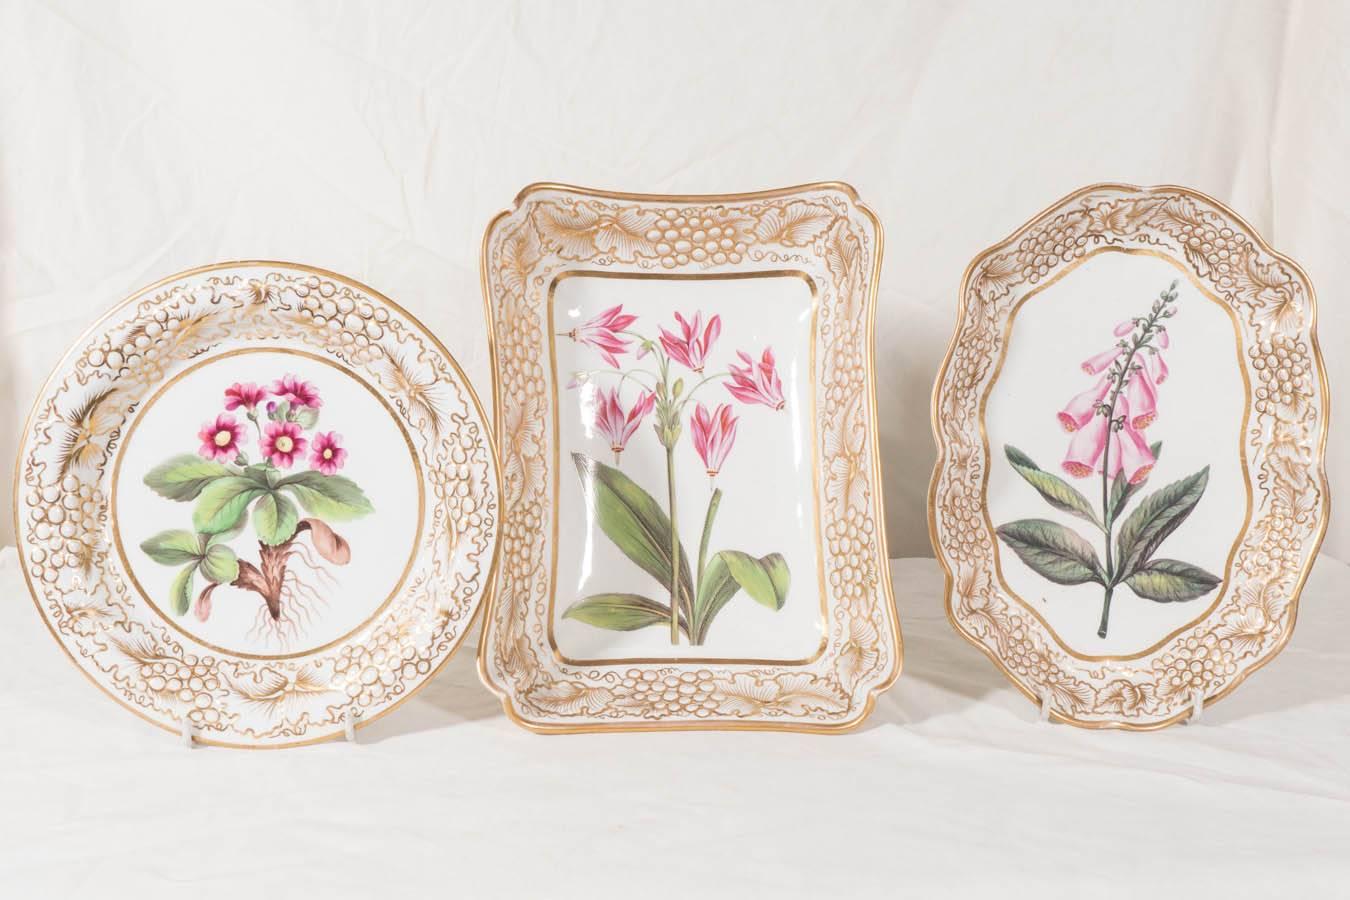 Hand-Painted  Antique English Porcelain Service in a Style Similar to the Danish Flora Danica